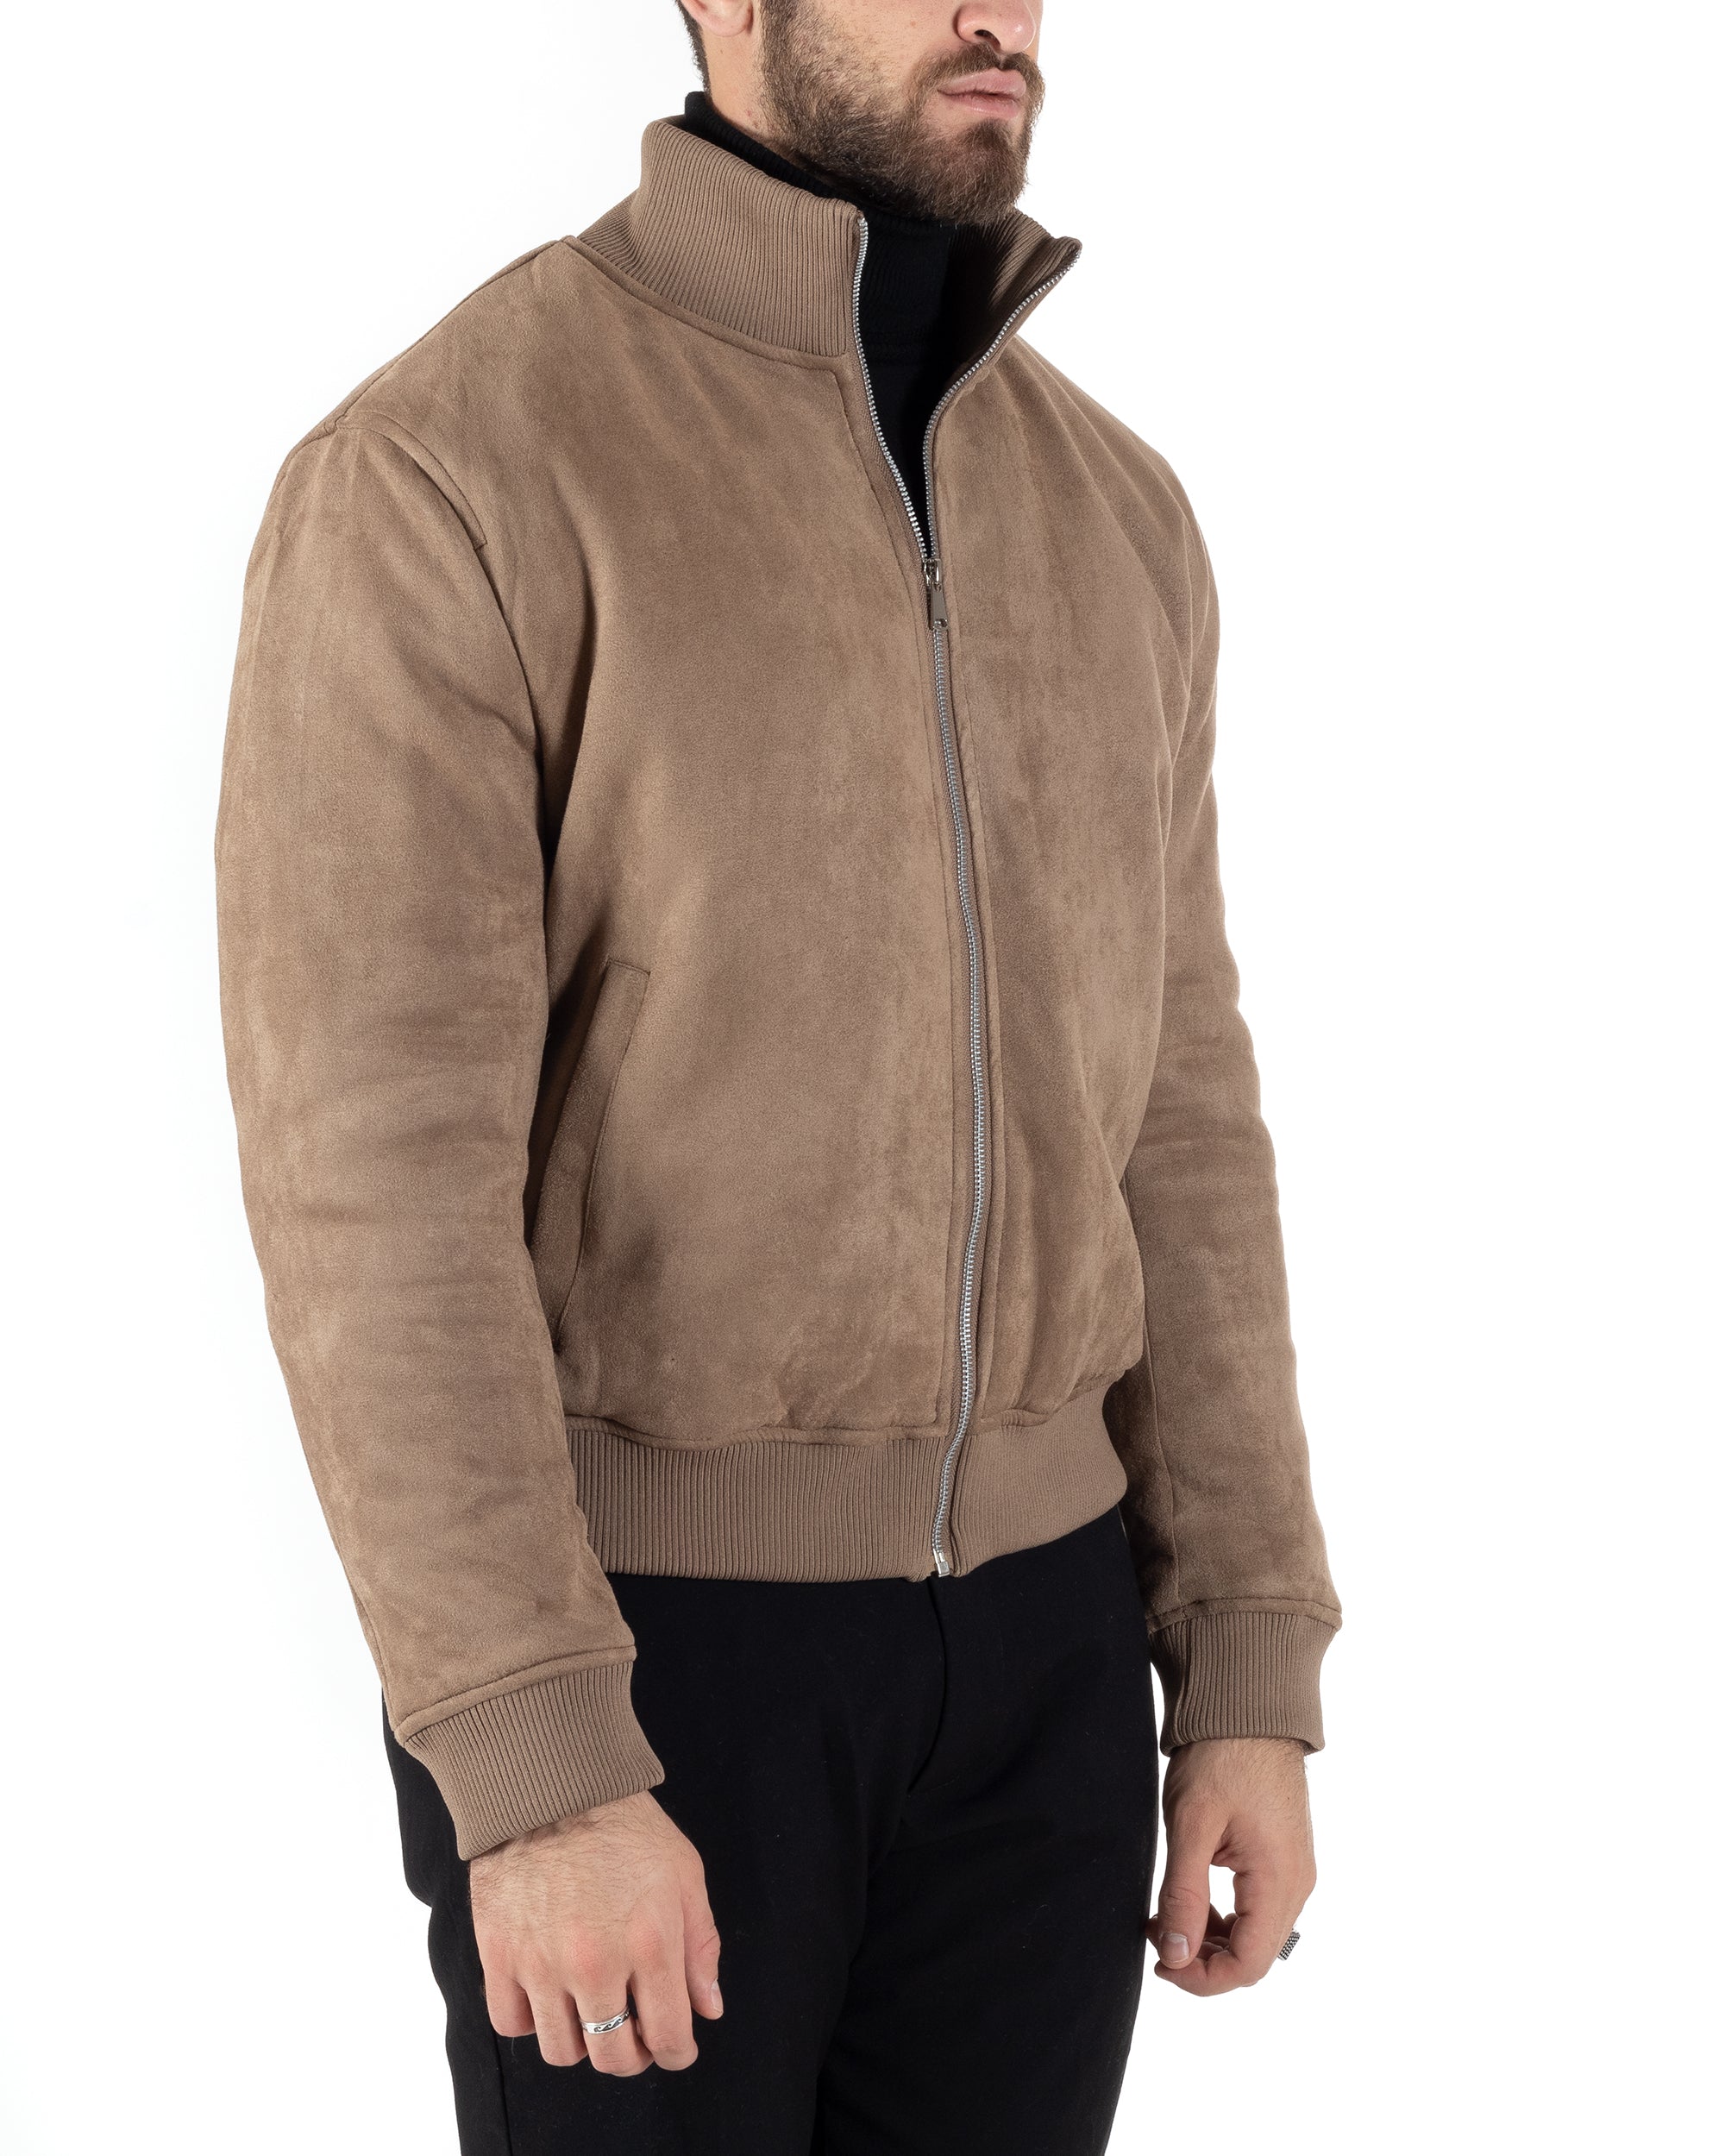 Men's Suede Jacket Long Sleeve Solid Color Beige Casual GIOSAL-G2992A